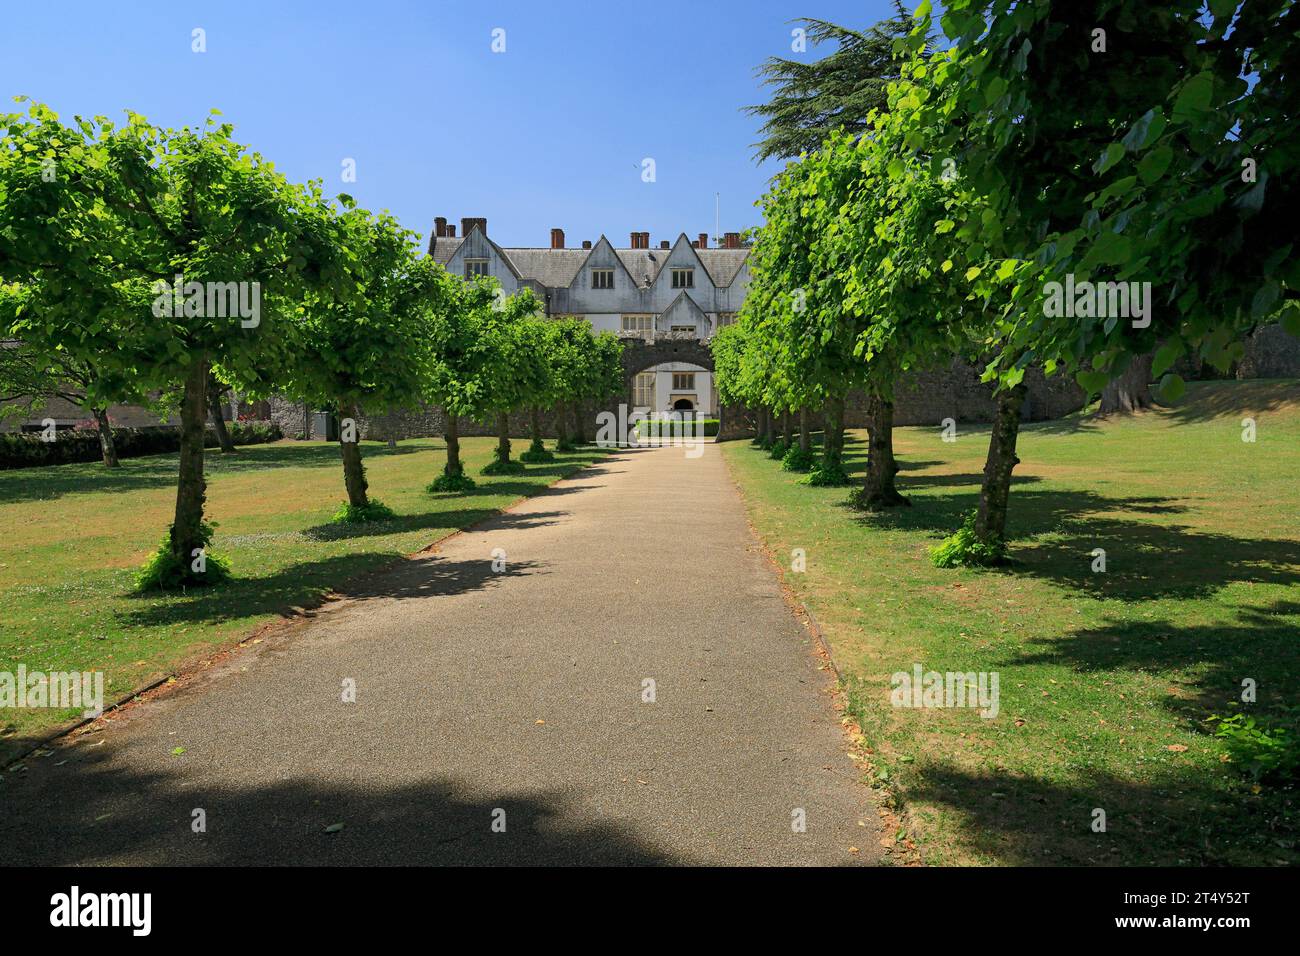 St Fagans Castle, National Museum of History, St Fagans, Cardiff, South Wales, UK. Stock Photo